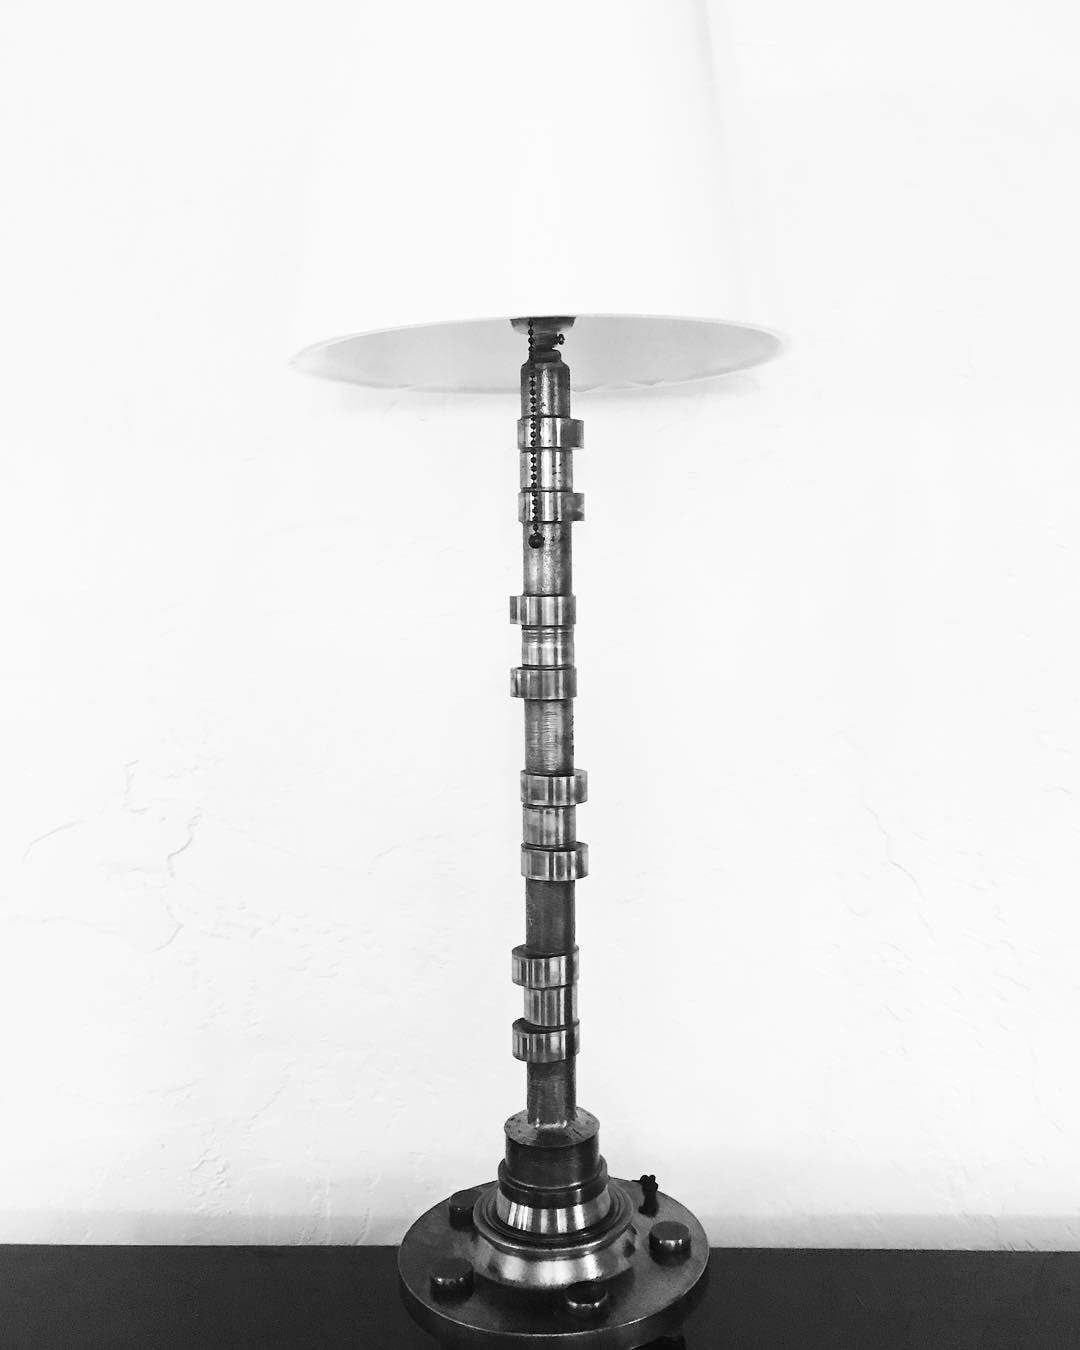 Lamp made out of a car's camshaft with its shade.